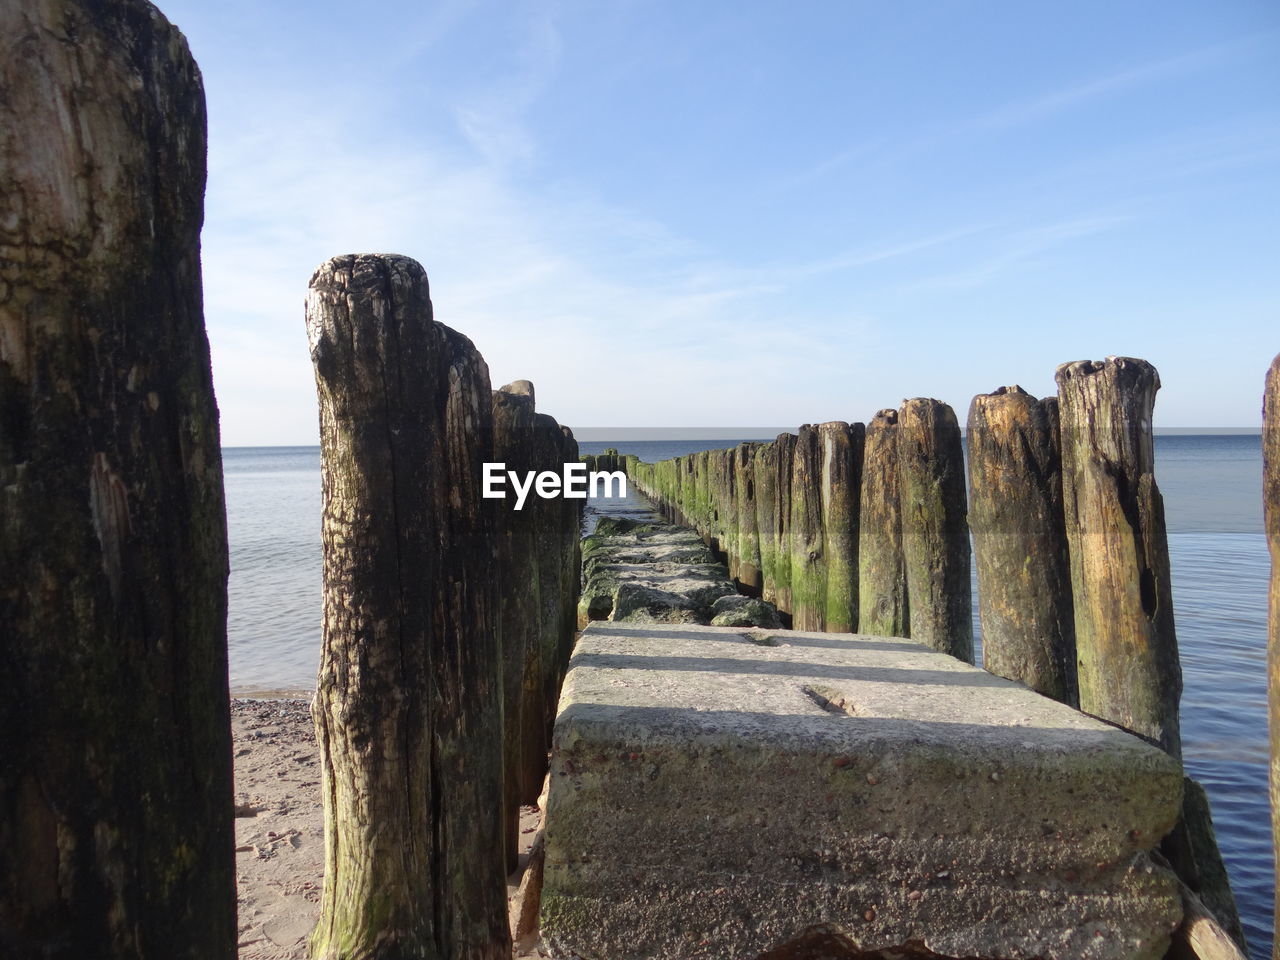 Narrow wooden posts in calm sea against blue sky